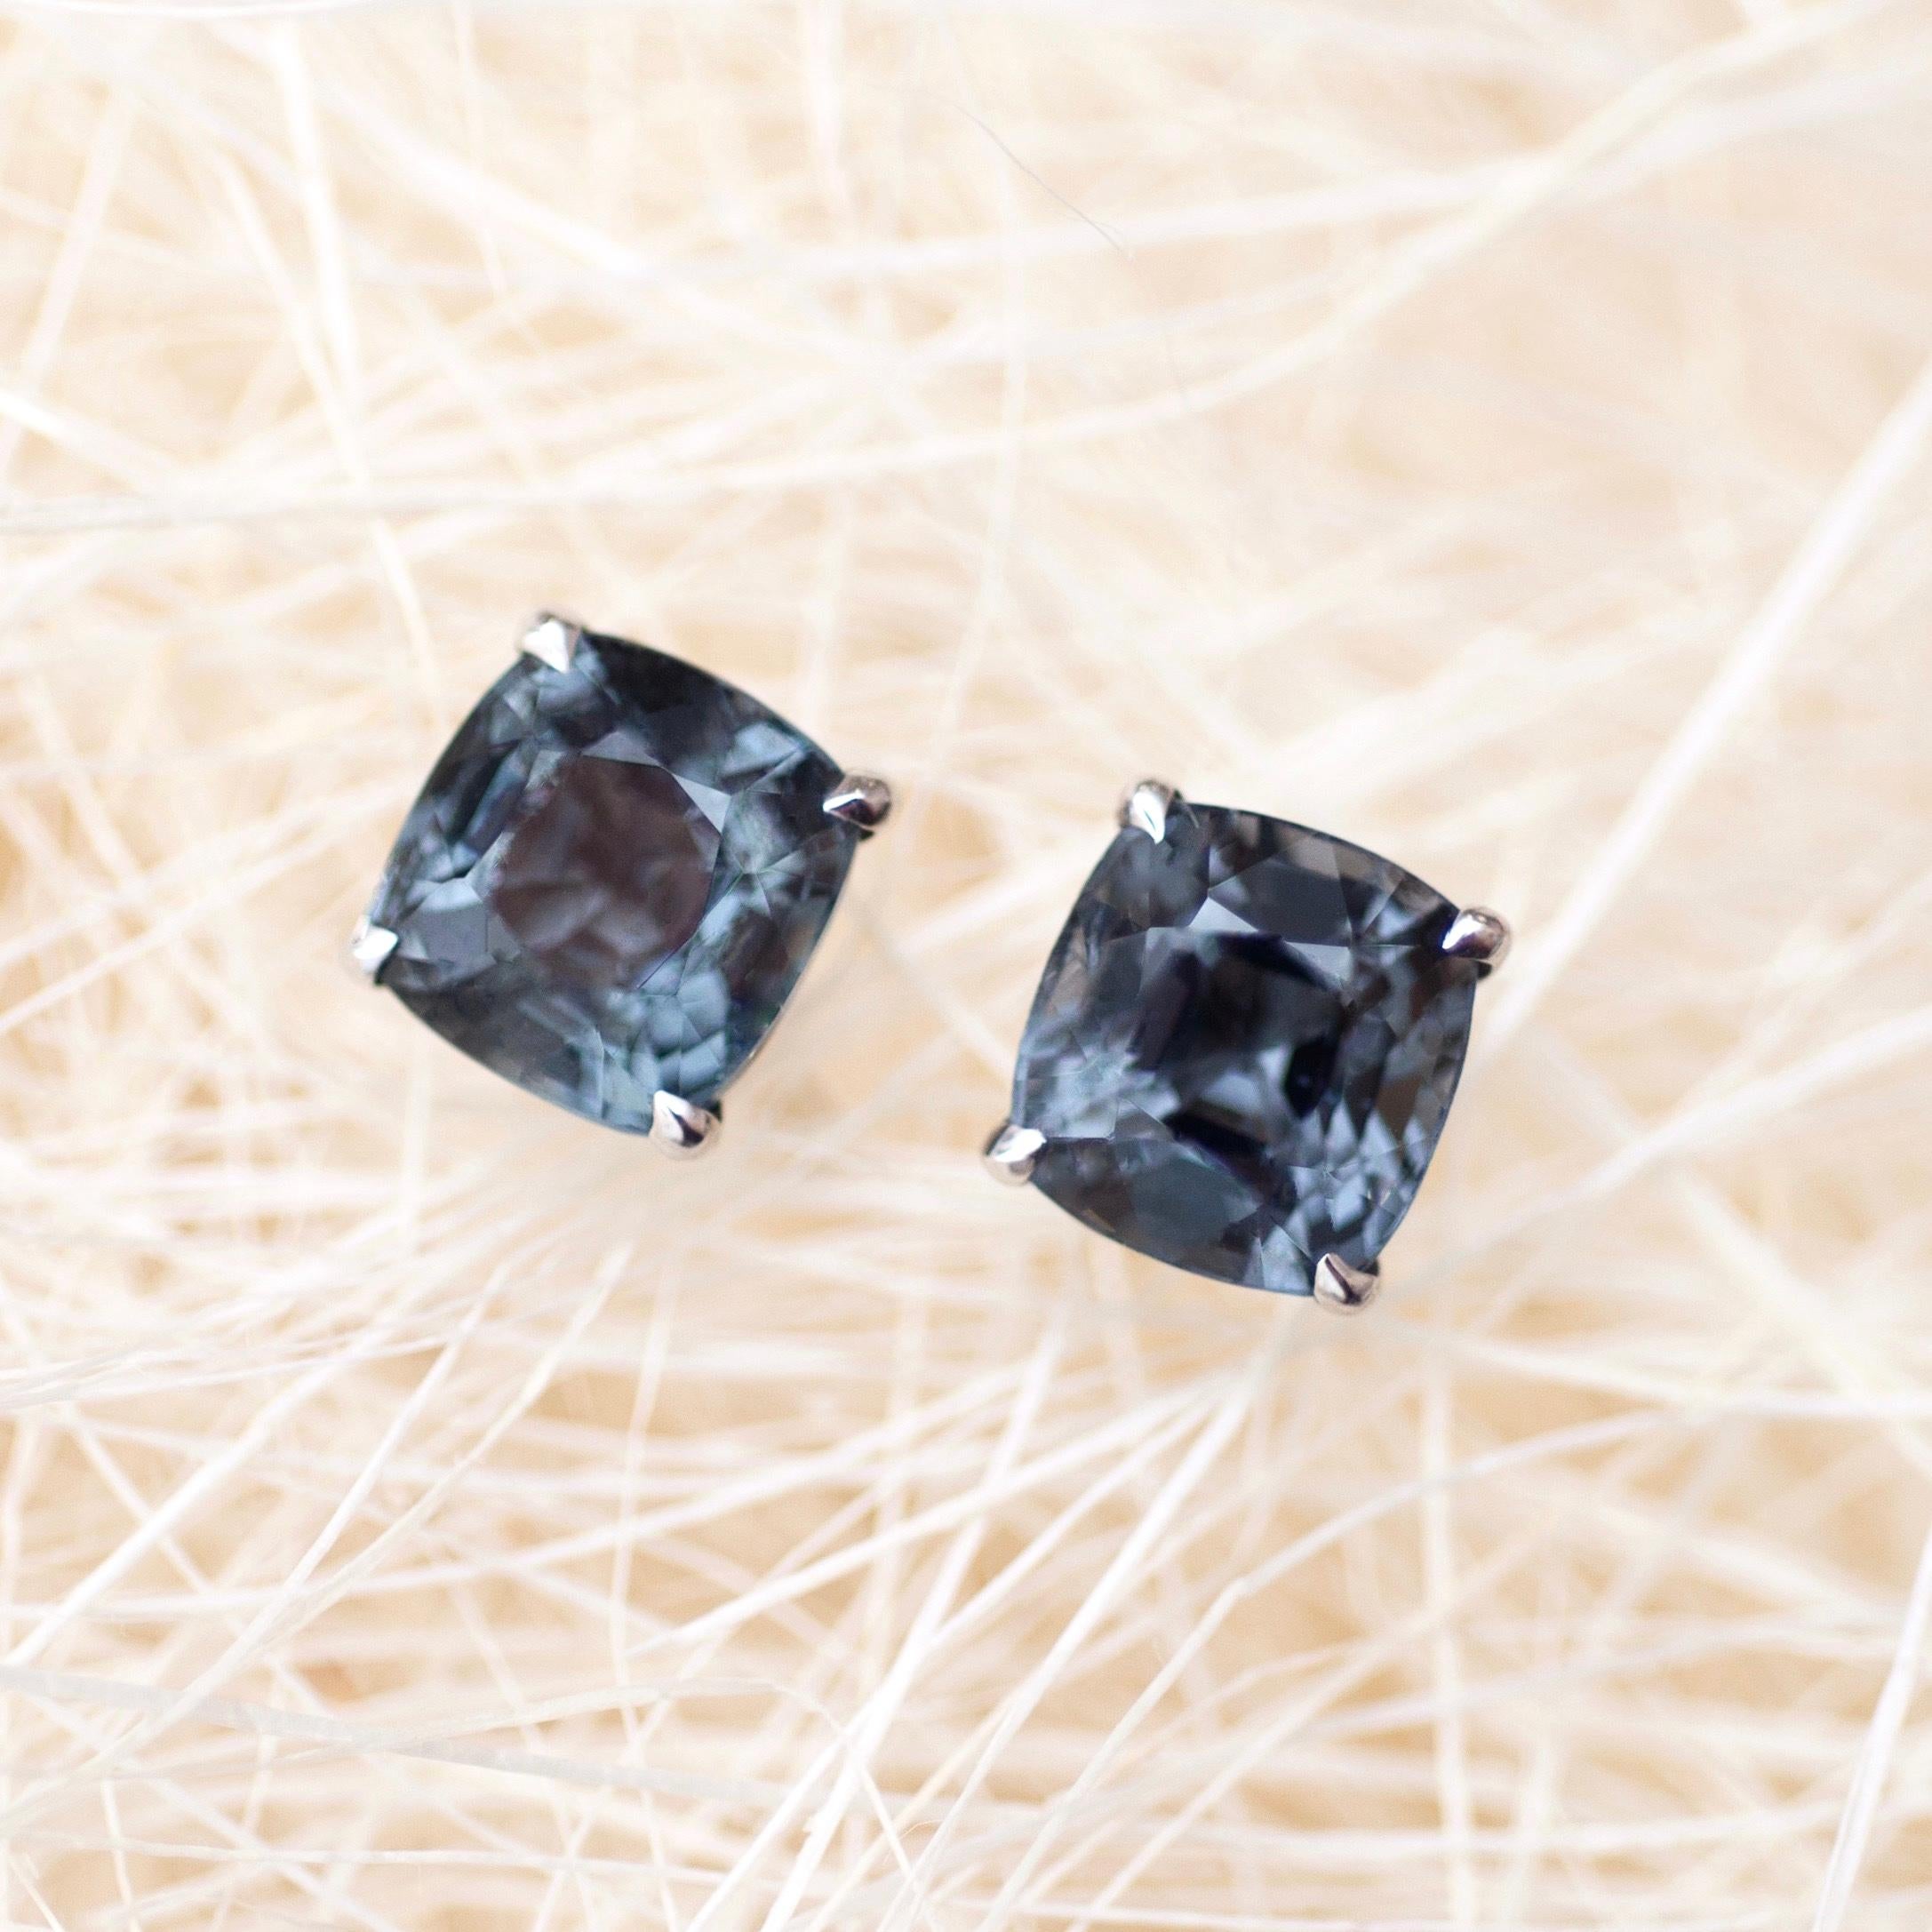 This spinel is looking like thunderstorm just above the sea, when the dark stormy sky with grey clouds is reflected in the water.
This white gold stud earrings with a small part of a stormy sky will become
your favorite every day jewelry.
This